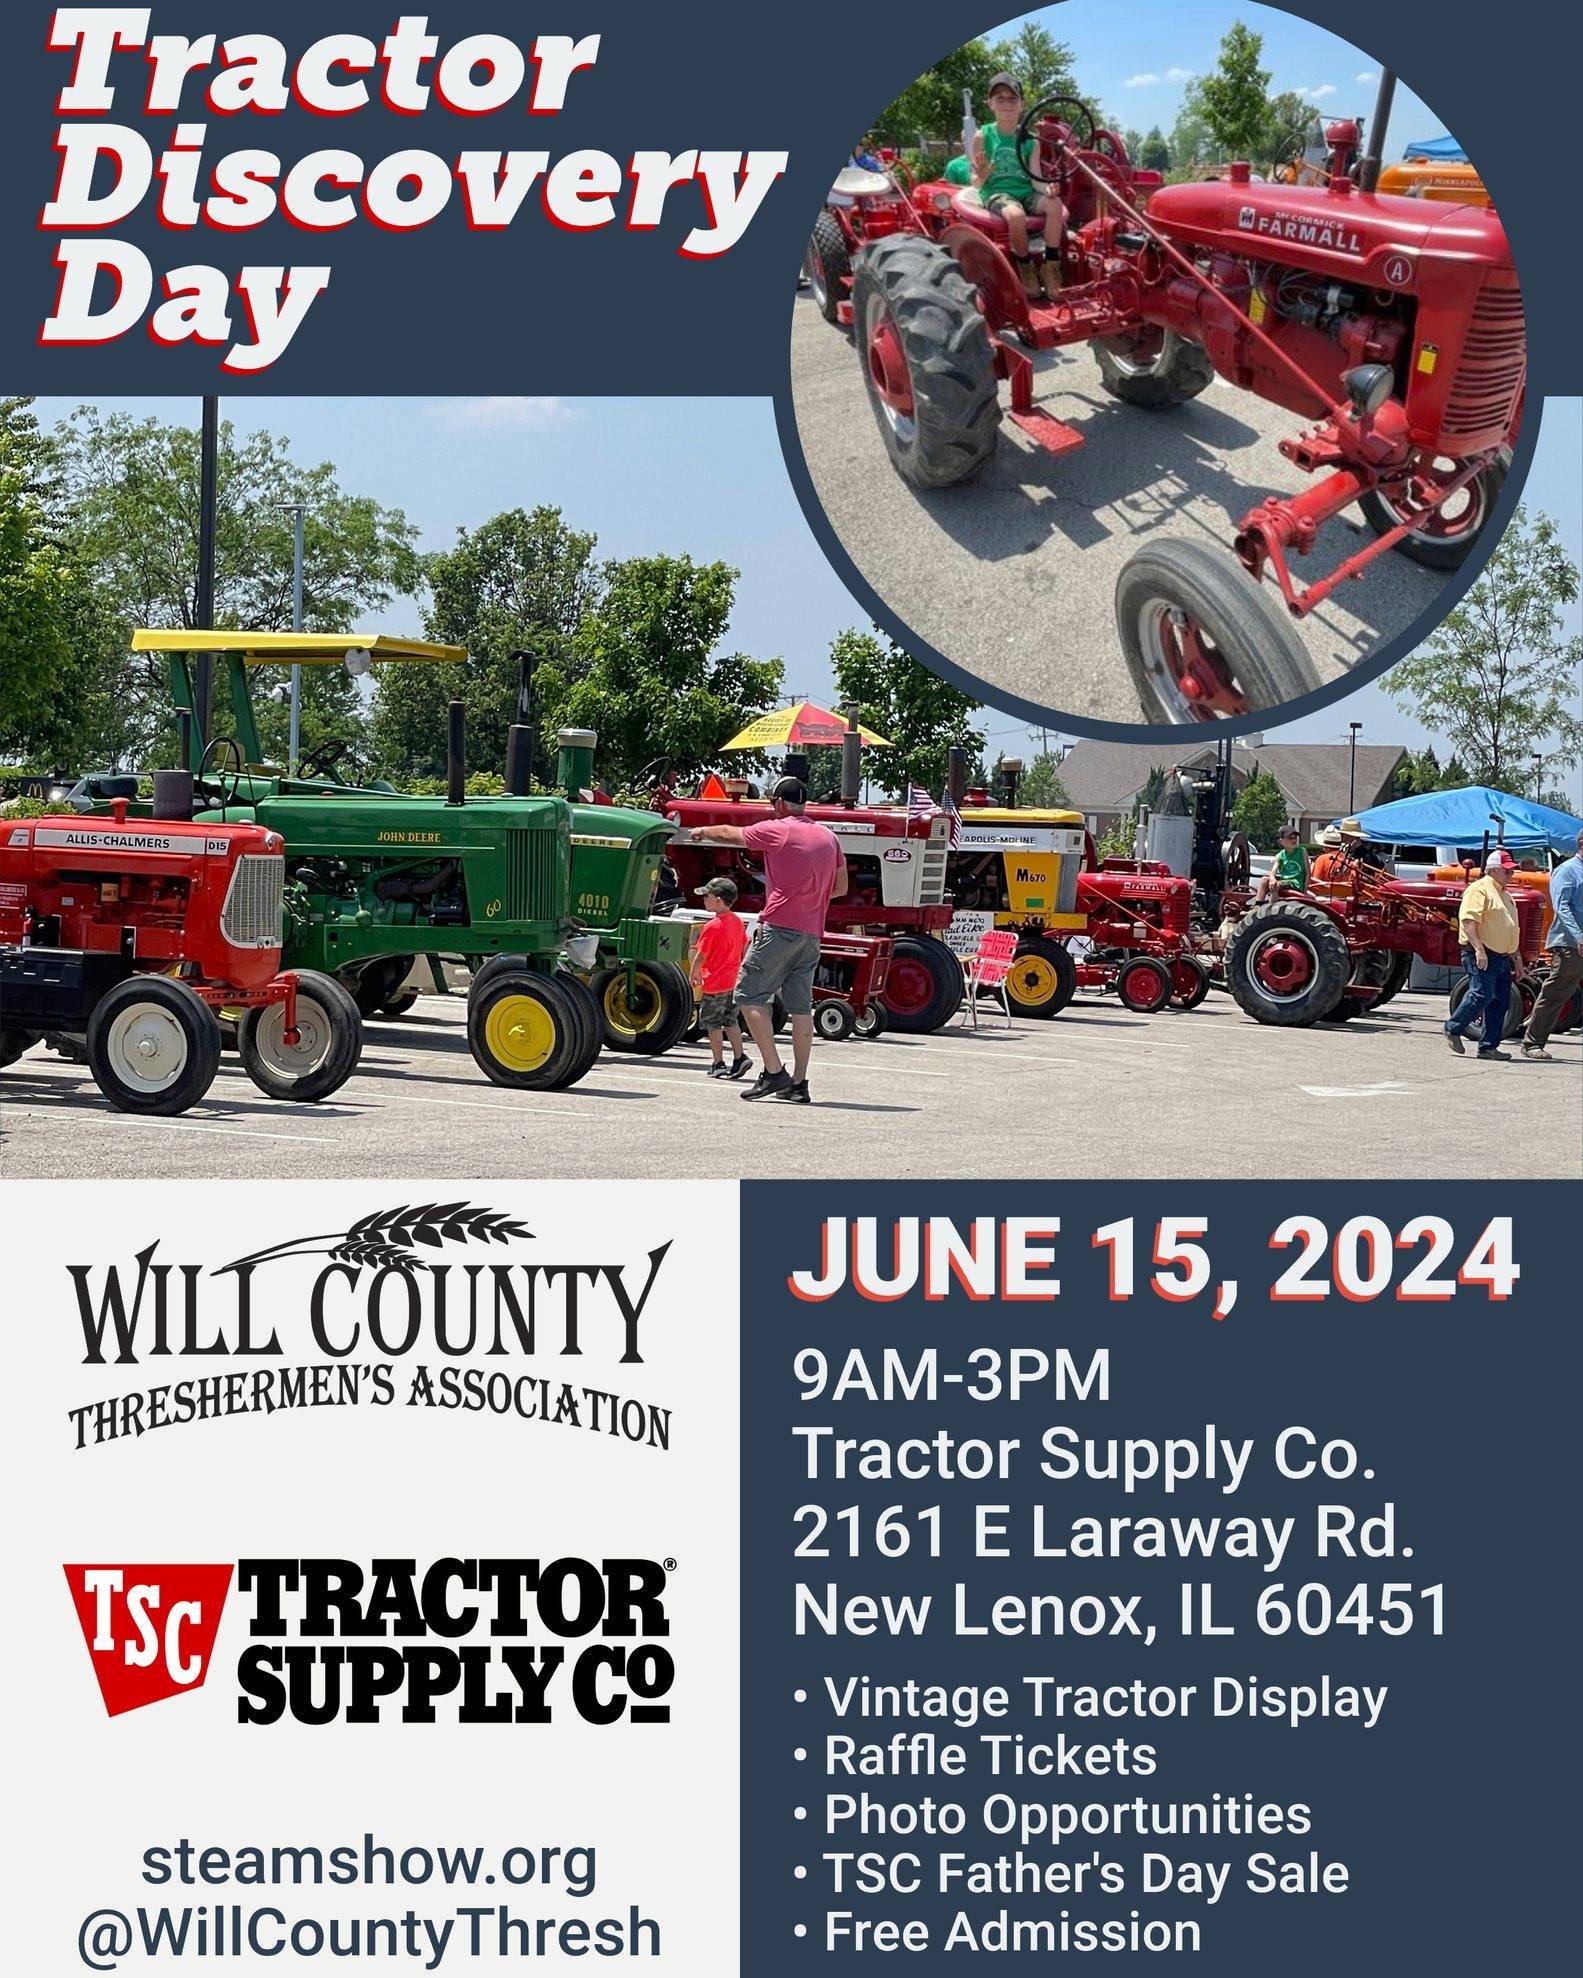 Rev up your summer at Tractor Discovery Day on June 15th, 2024, with the Will County Threshermen's Association at Tractor Supply Co. in New Lenox, IL! Explore vintage tractors, enter the WCTA annual raffle, and enjoy great deals on outdoor essentials